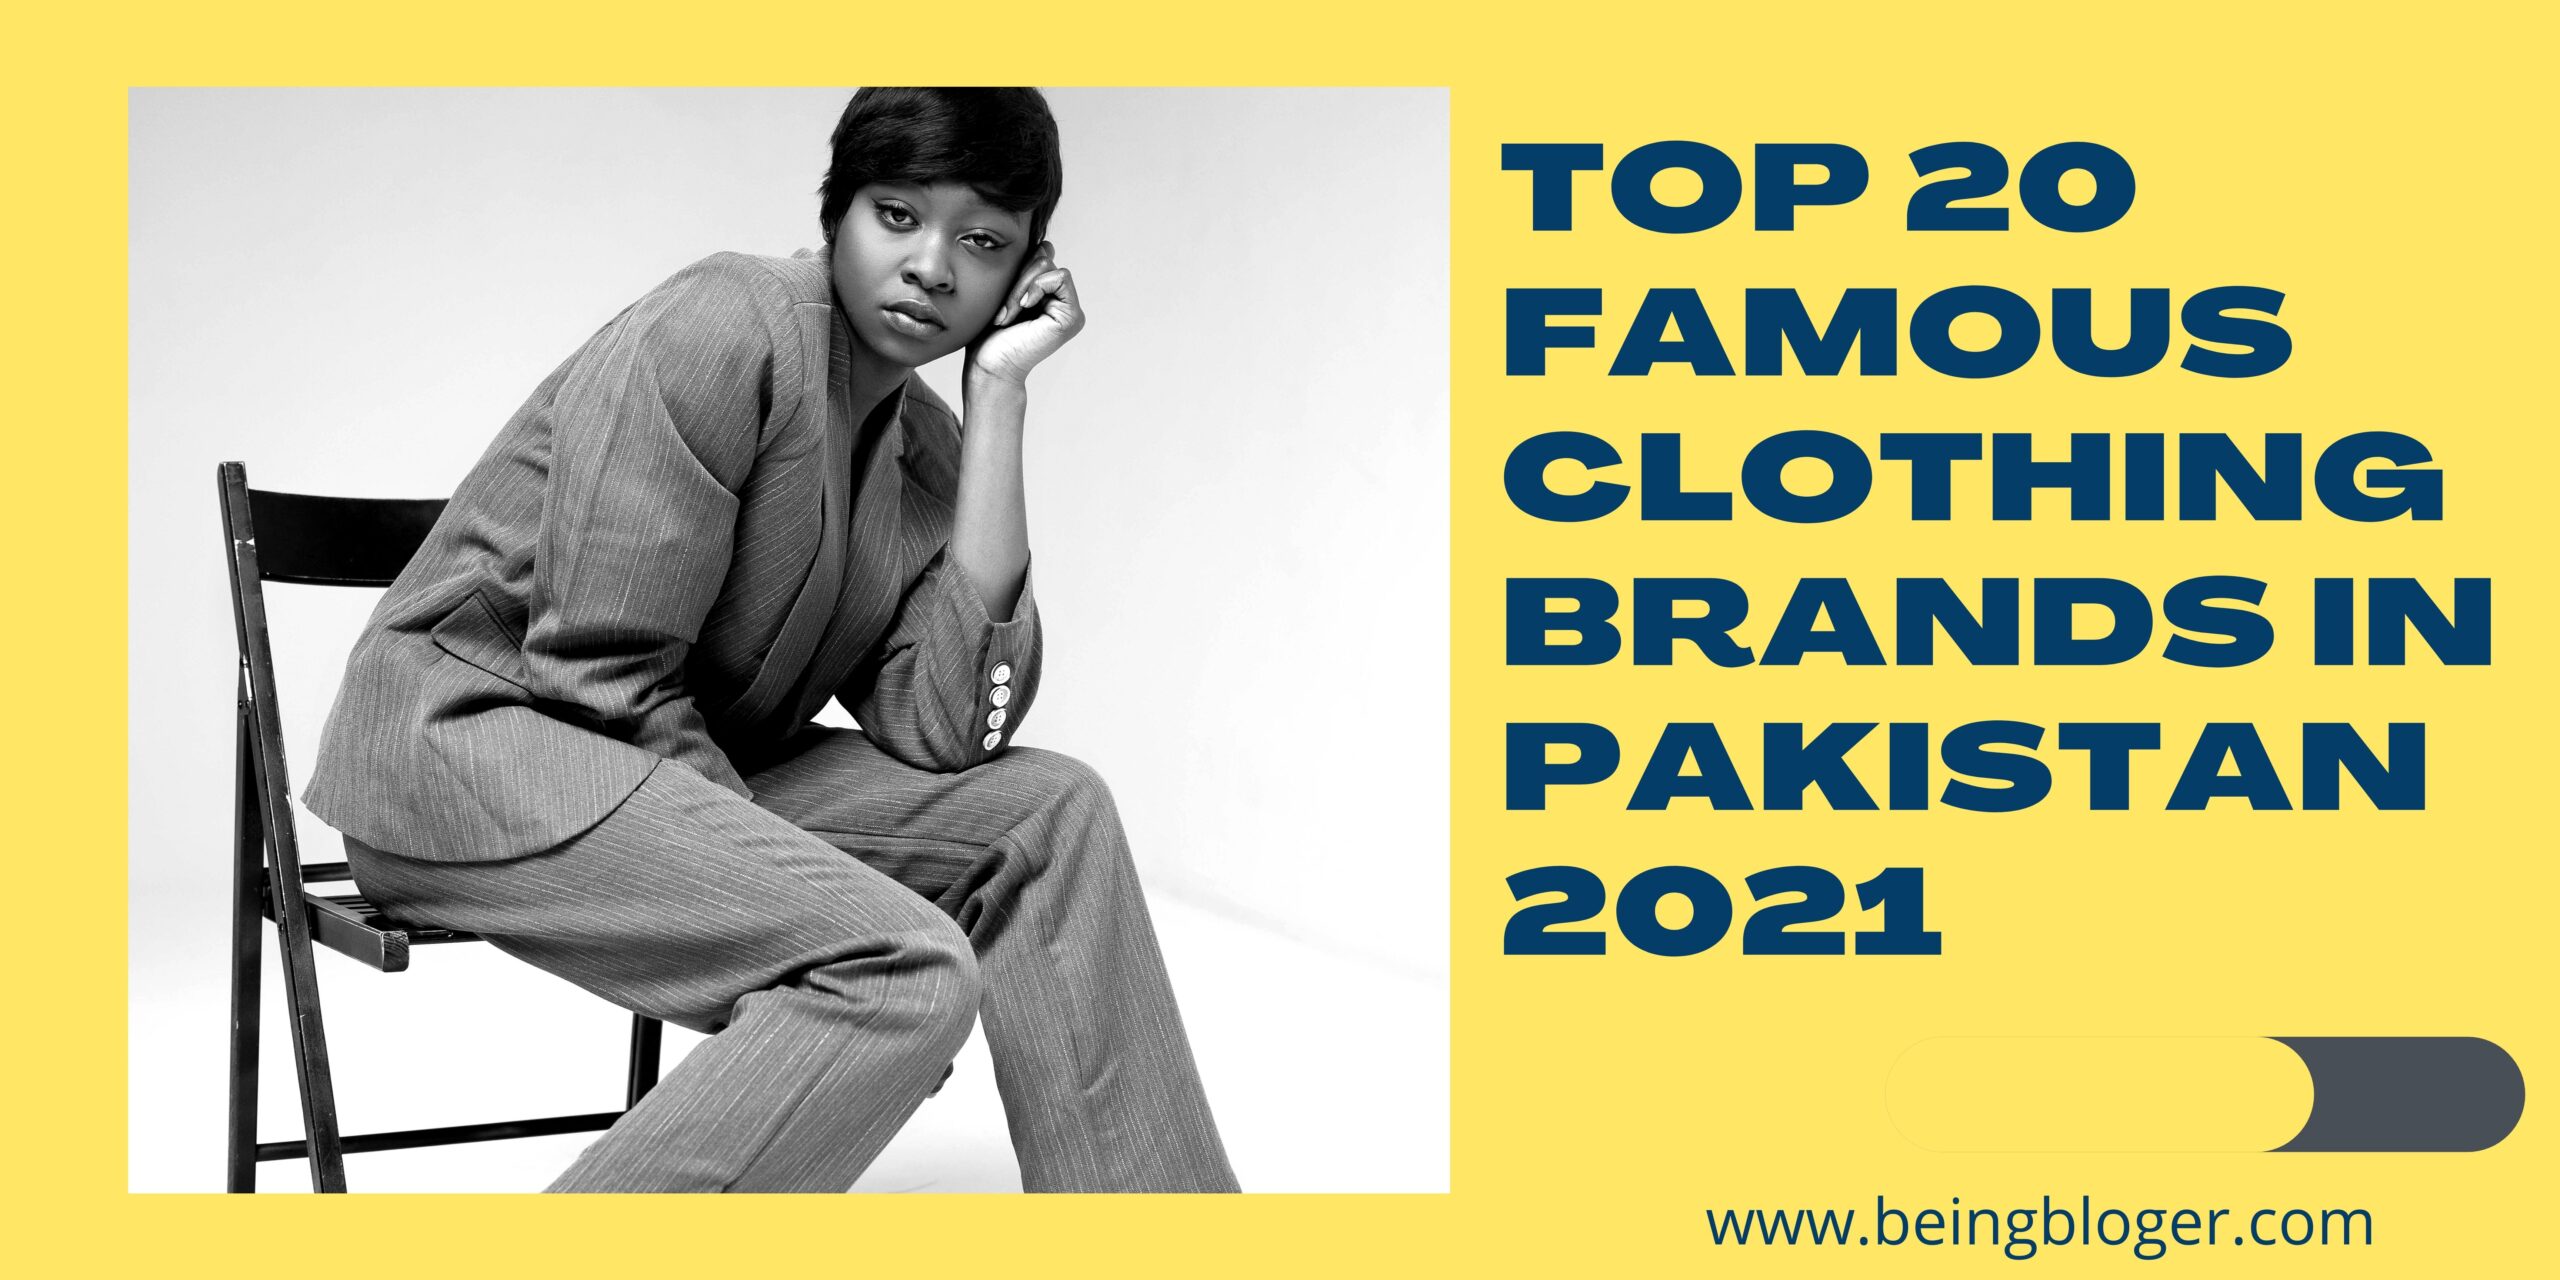 Top 20 Famous Clothing Brands in Pakistan 2021